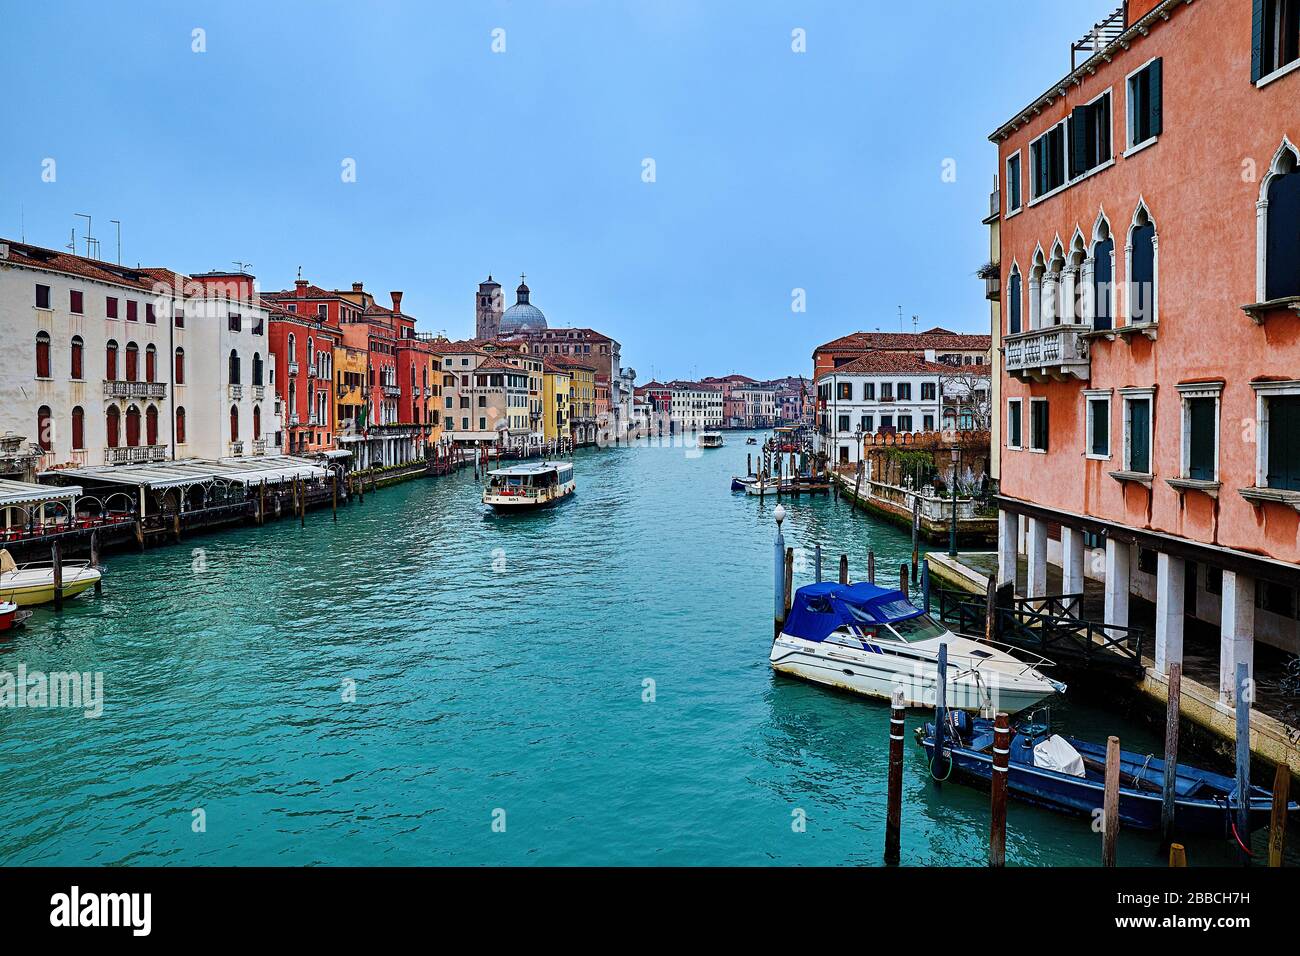 Venice, the capital of northern Italy’s Veneto region, is built on 118 small islands in a lagoon in the Adriatic Sea. It has no roads, just canals, li Stock Photo